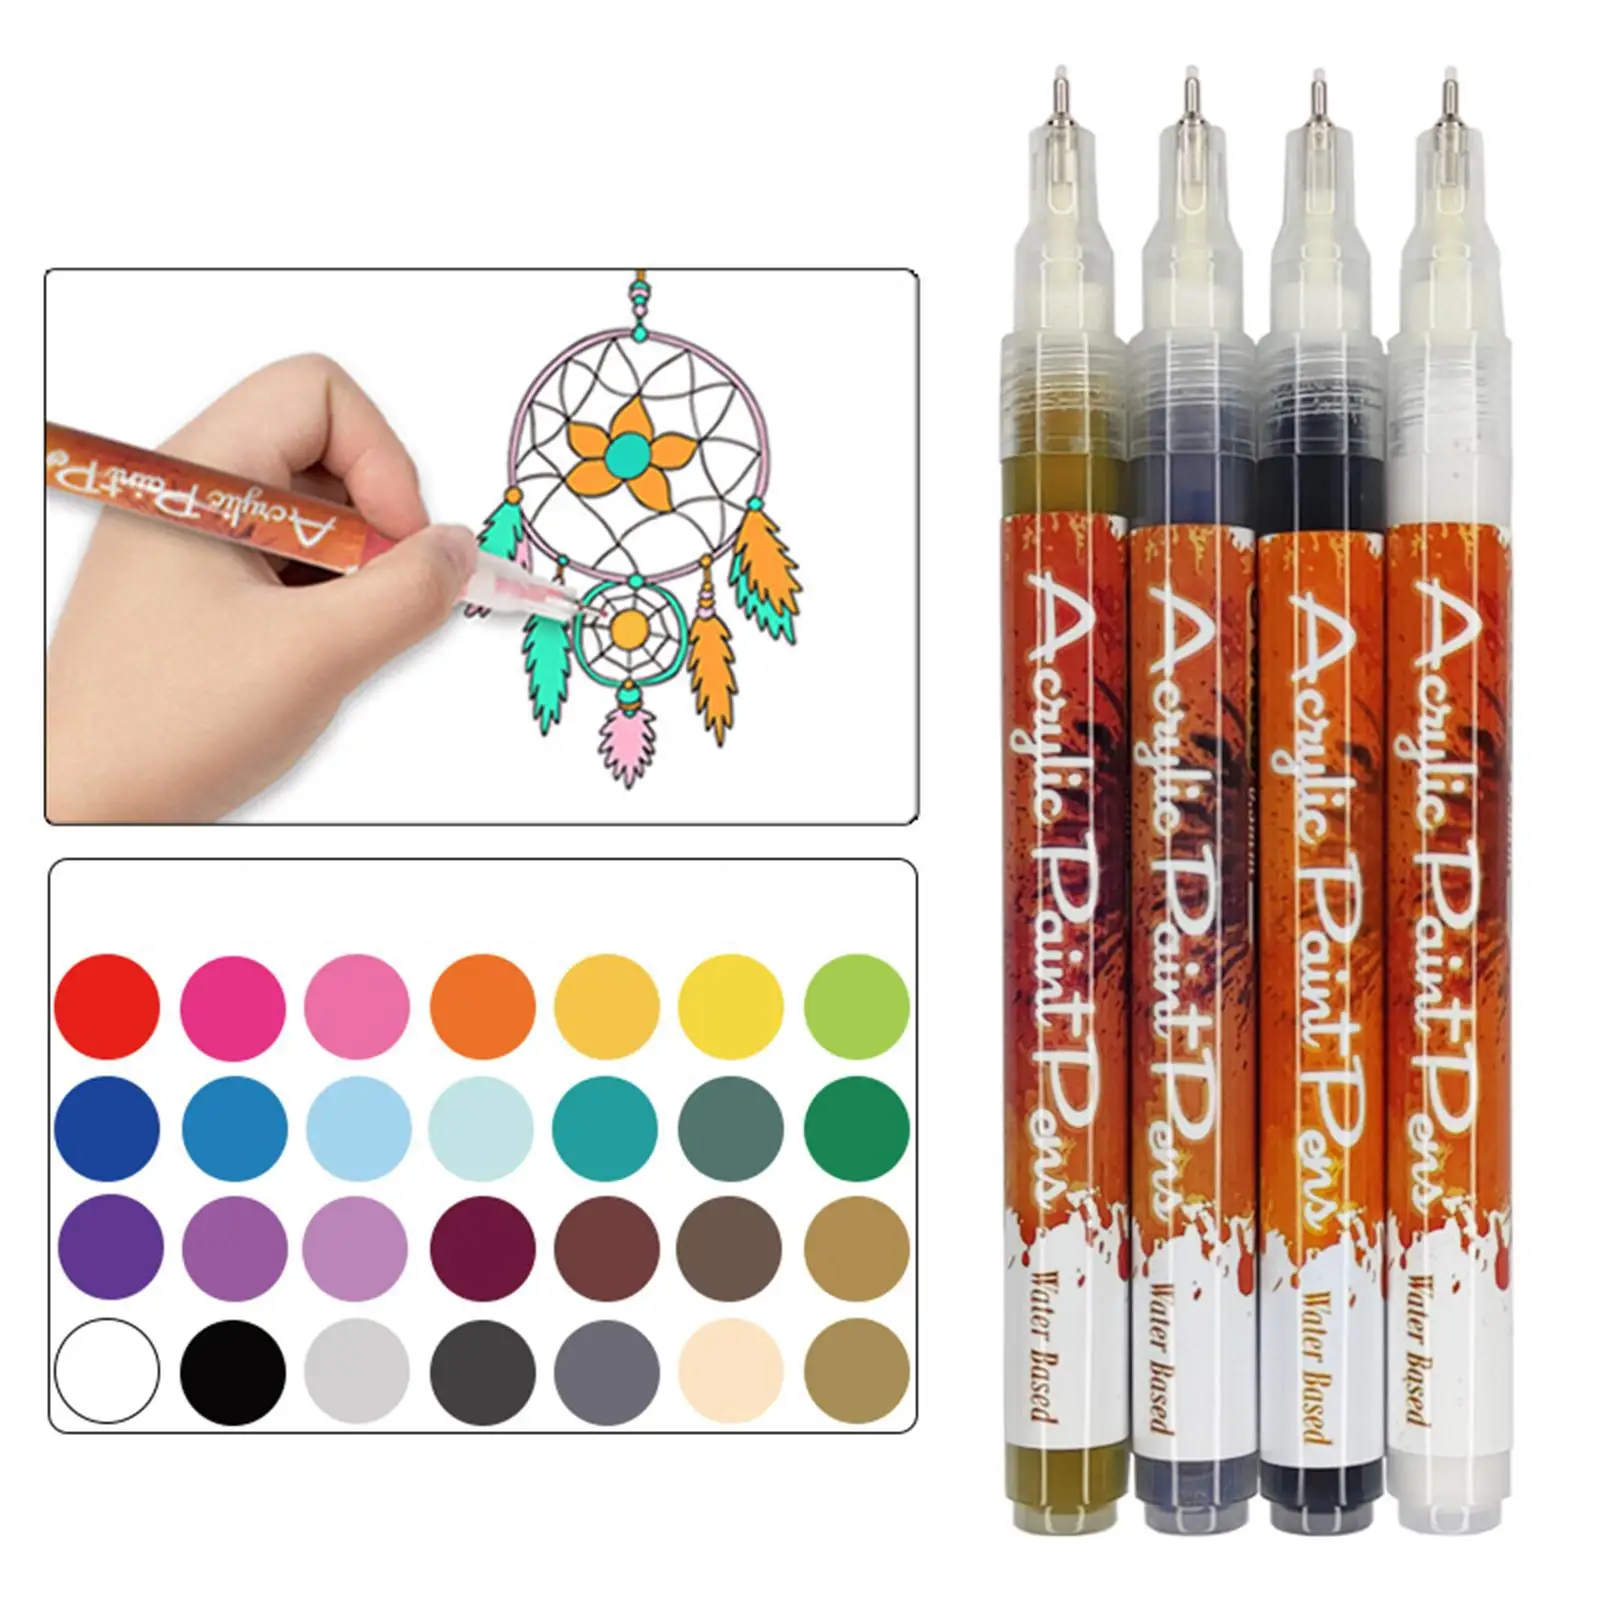 4 Colors Acrylic Paint Pens Permanent Marker Pens for Rock Wood Canvas Ceramic , Kids Birthday Gift